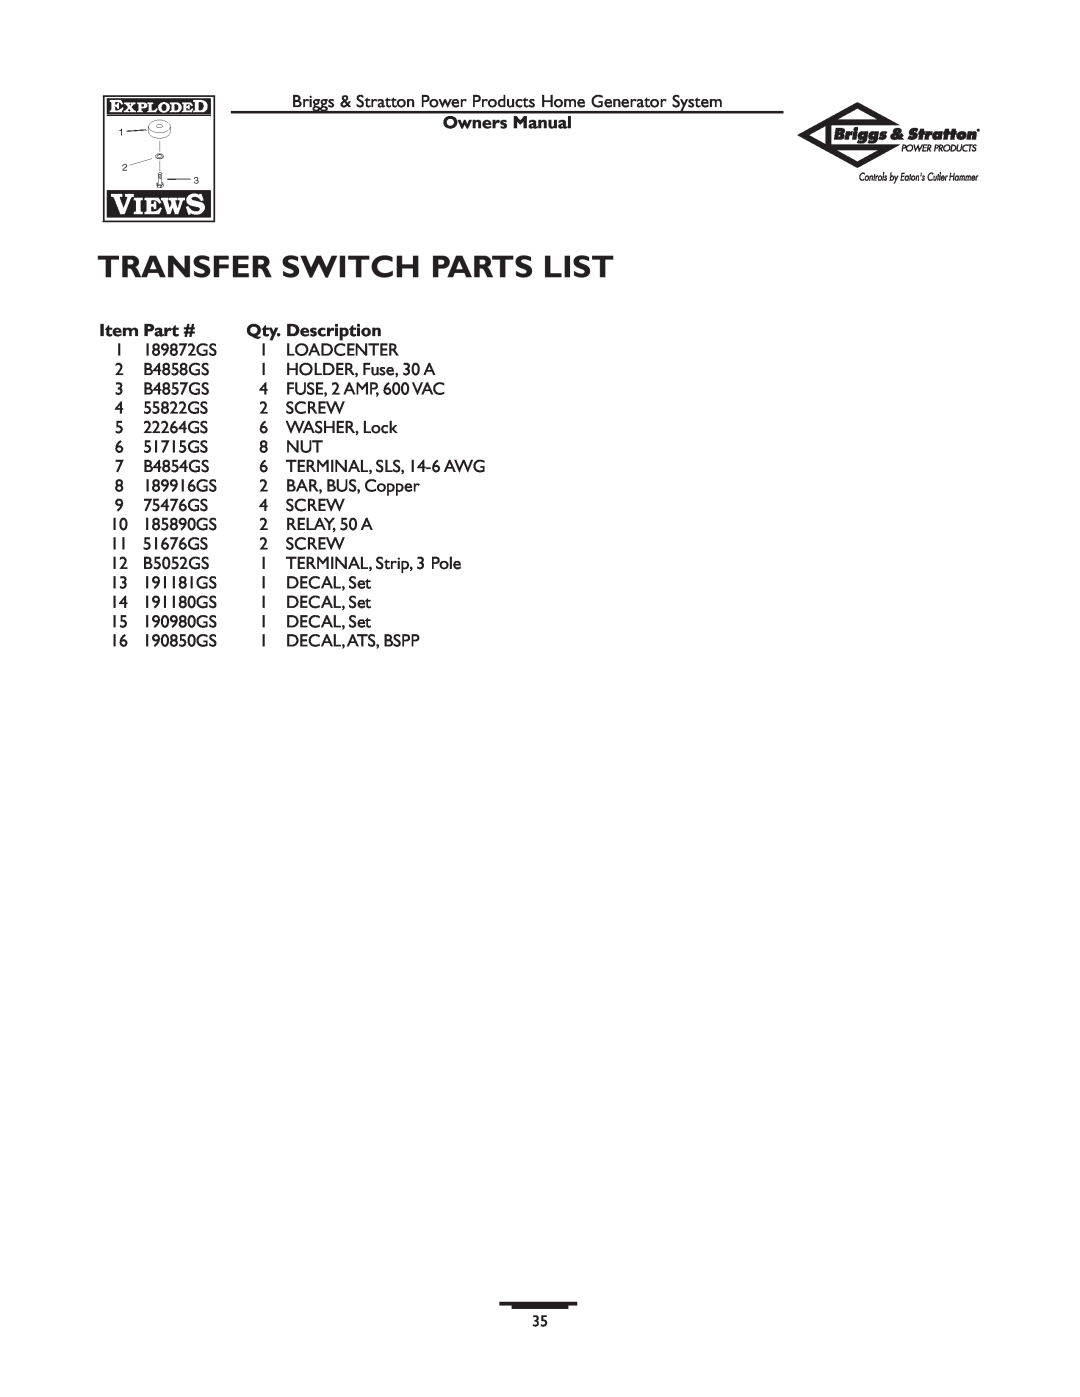 Briggs & Stratton 1679-0 owner manual Transfer Switch Parts List, Owners Manual, Item Part #, Qty. Description 